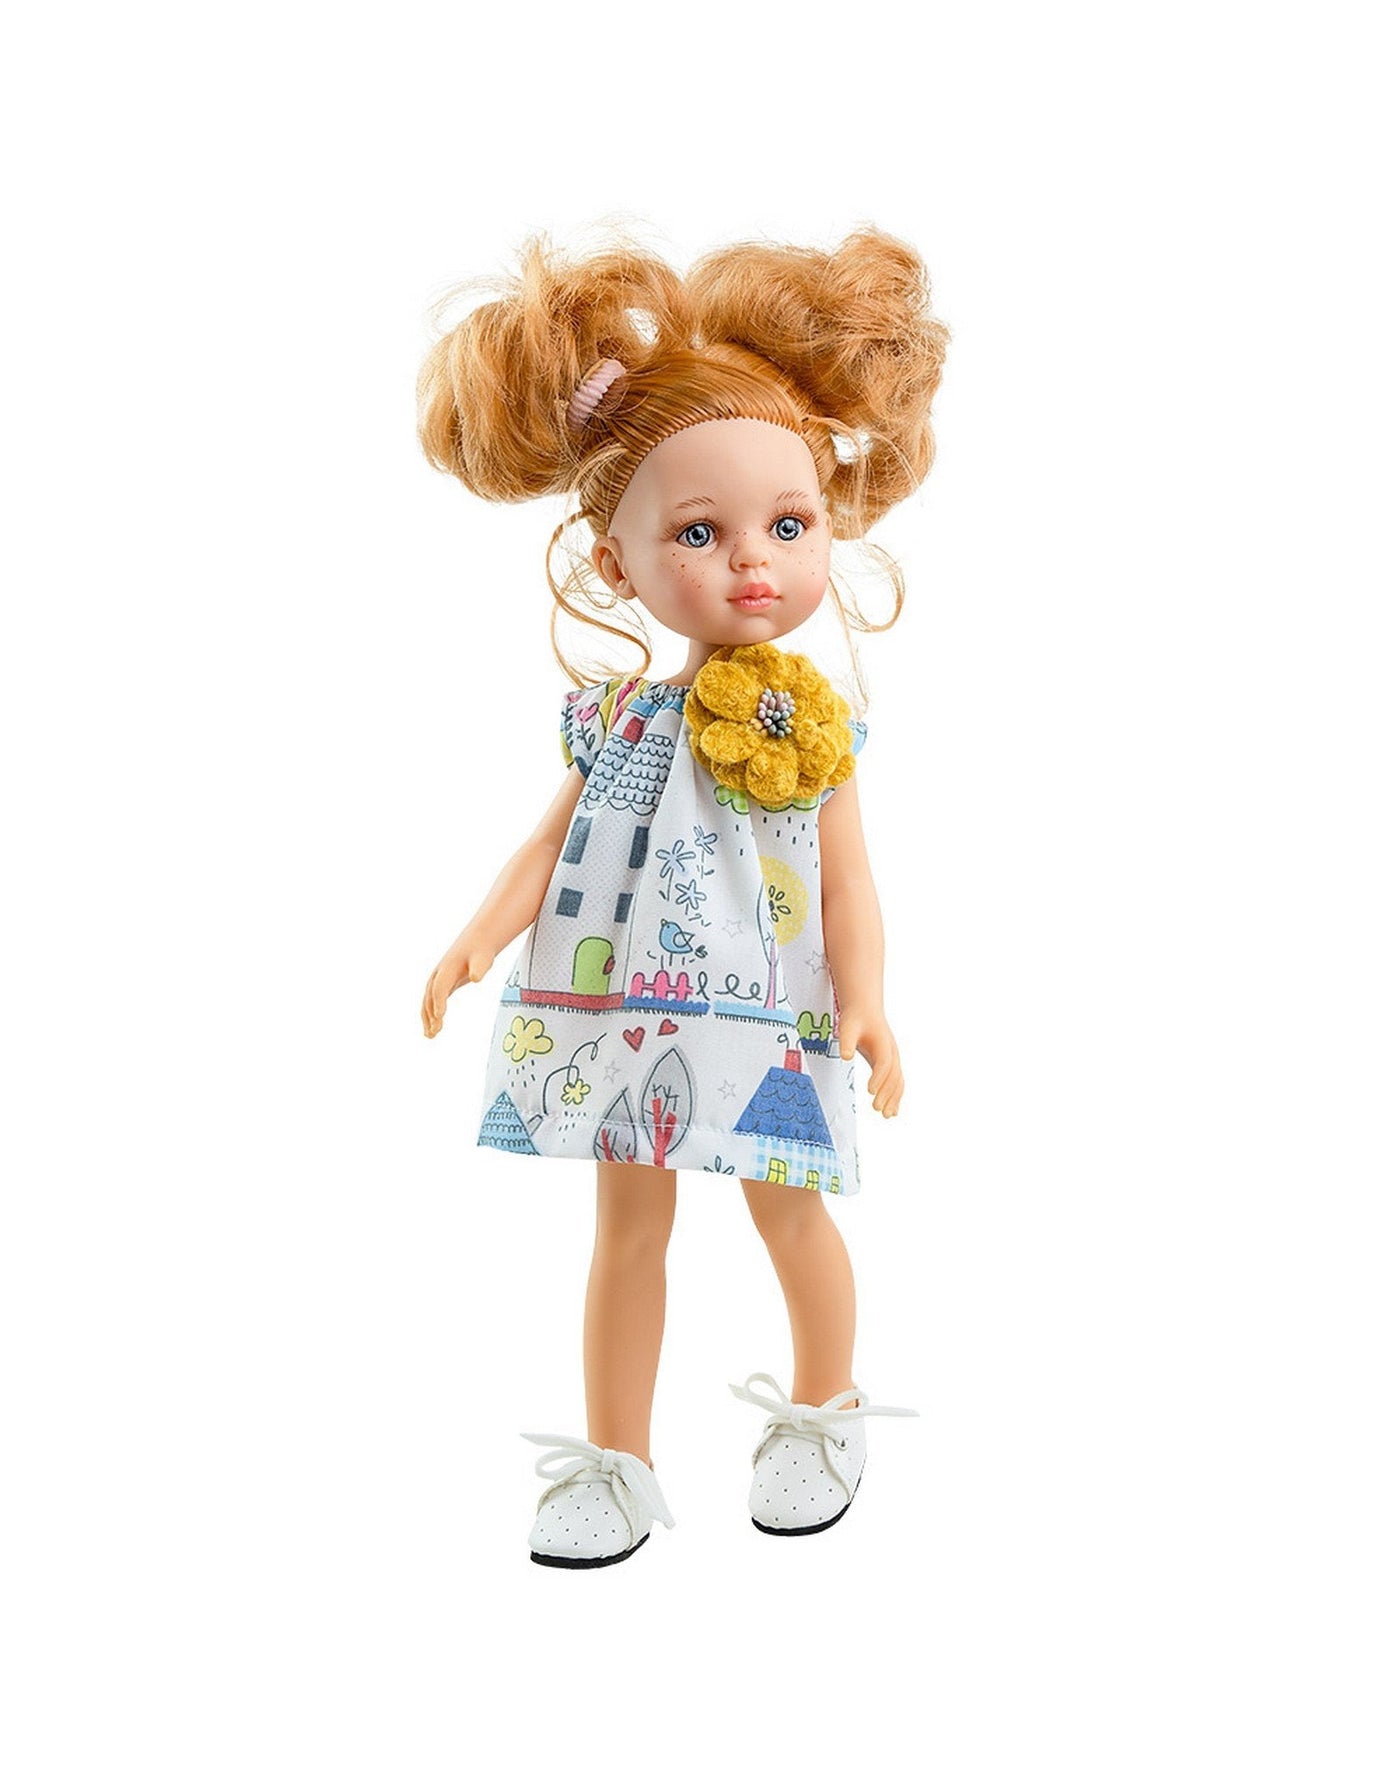 Las Amigas Doll - Dasha with homemade white dress and yellow flower - Paola Reina